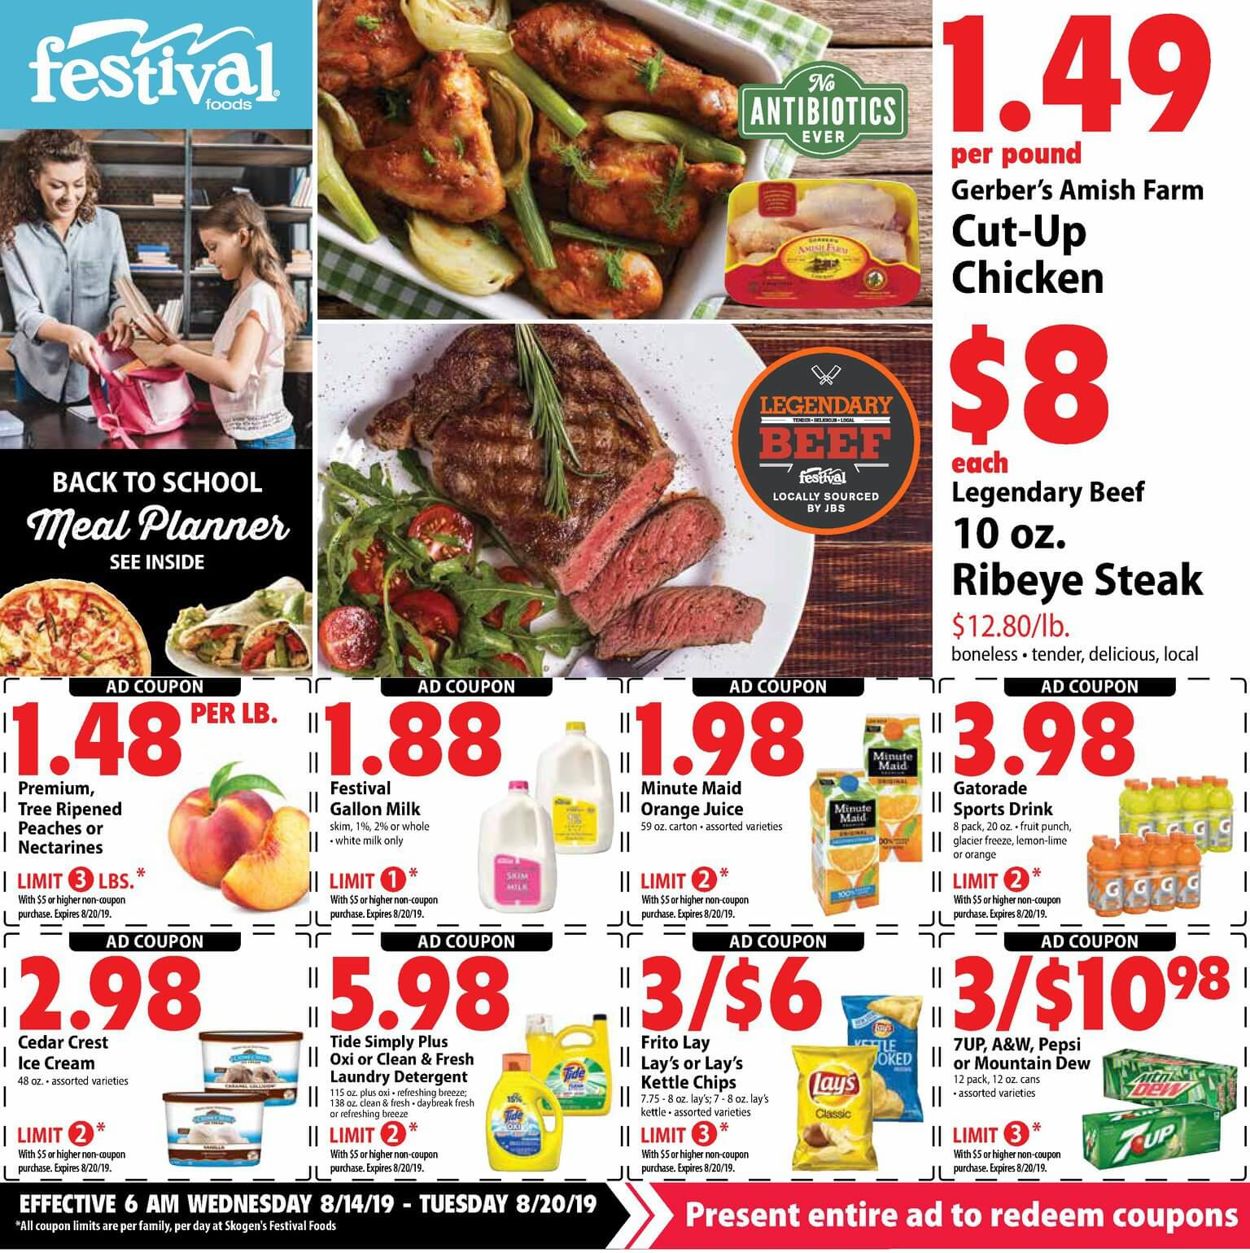 Festival Foods Current weekly ad 08/14 - 08/20/2019 - frequent-ads.com